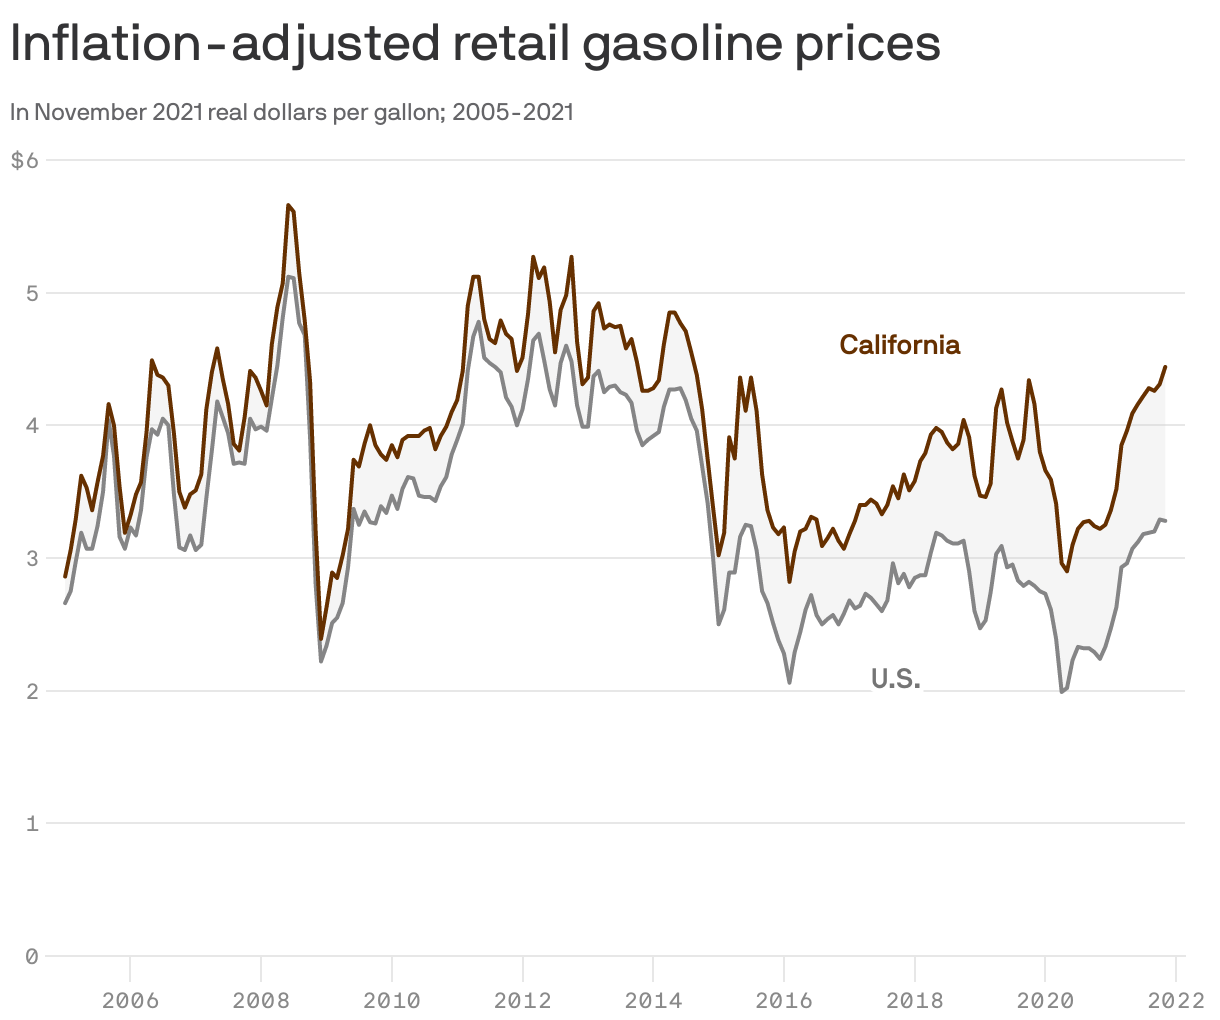 Inflation-adjusted retail gasoline prices